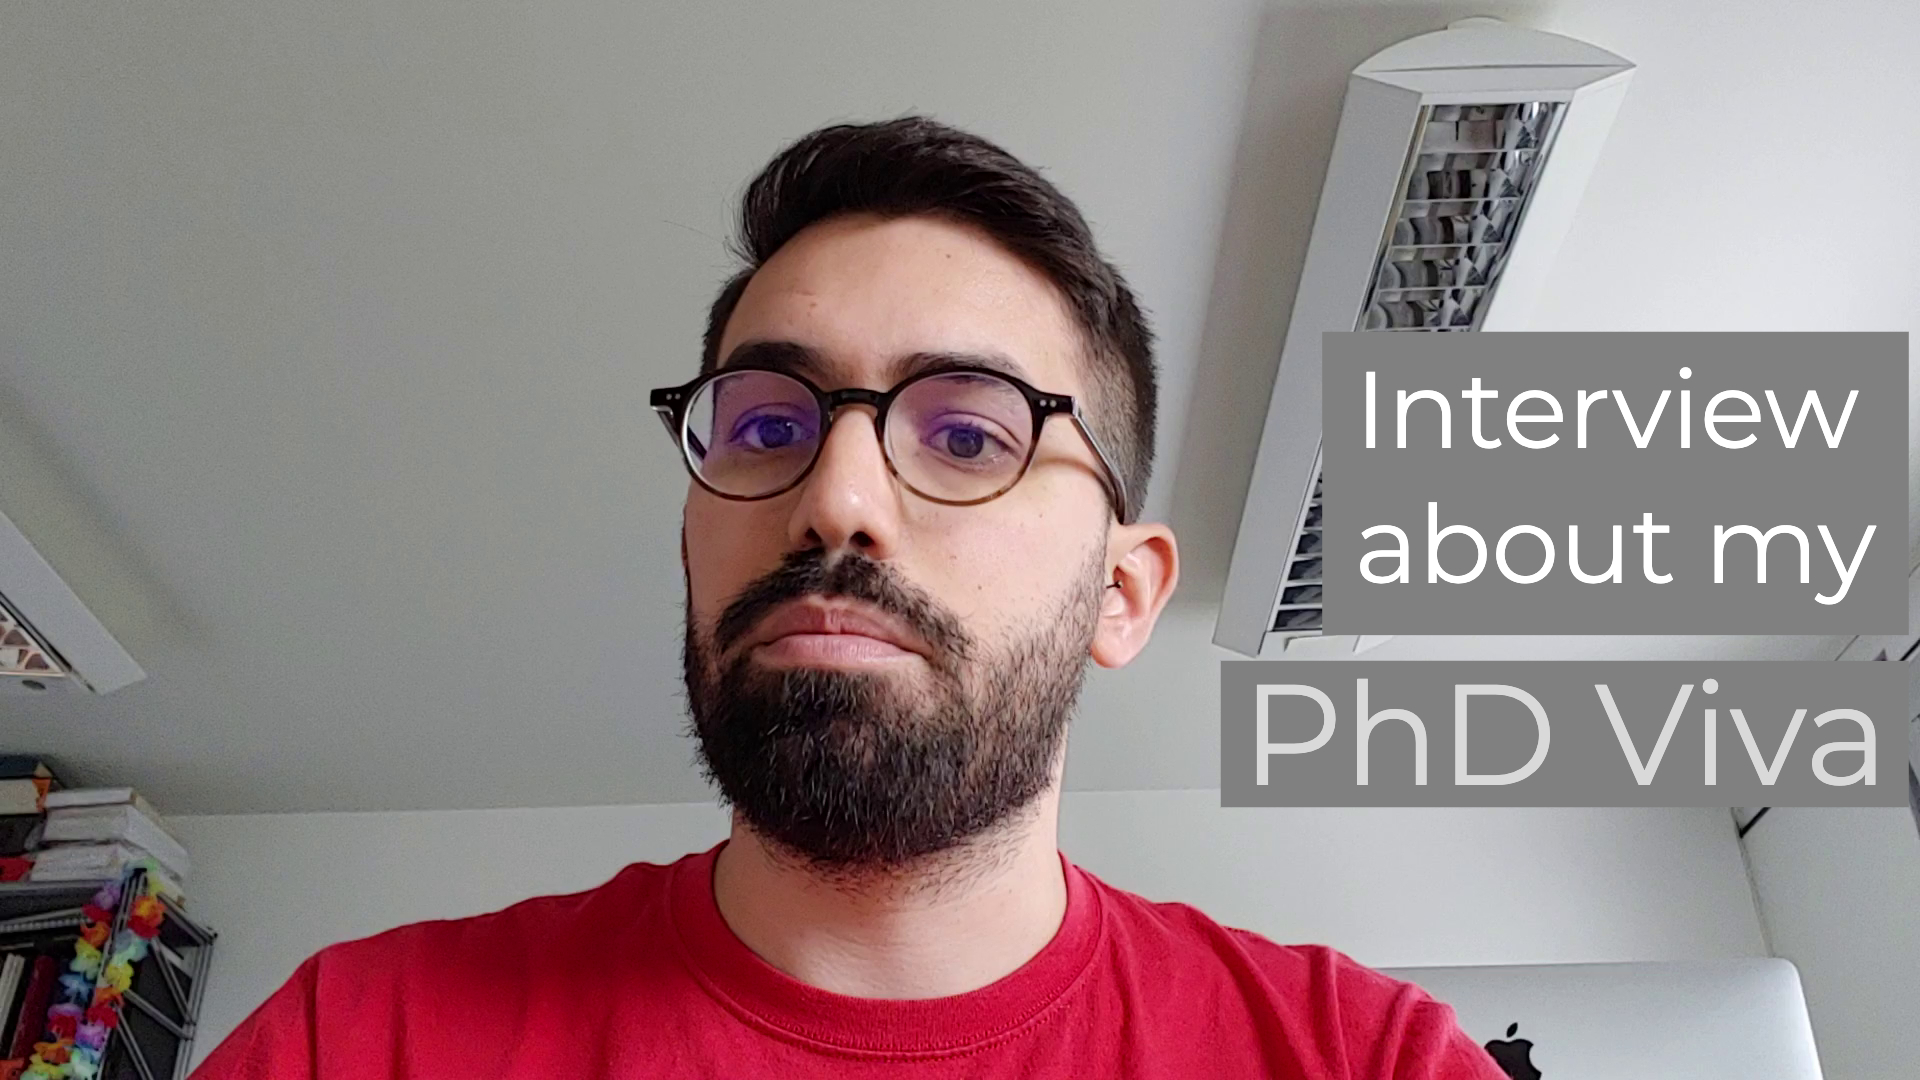 Project - Interview about my PHD Viva